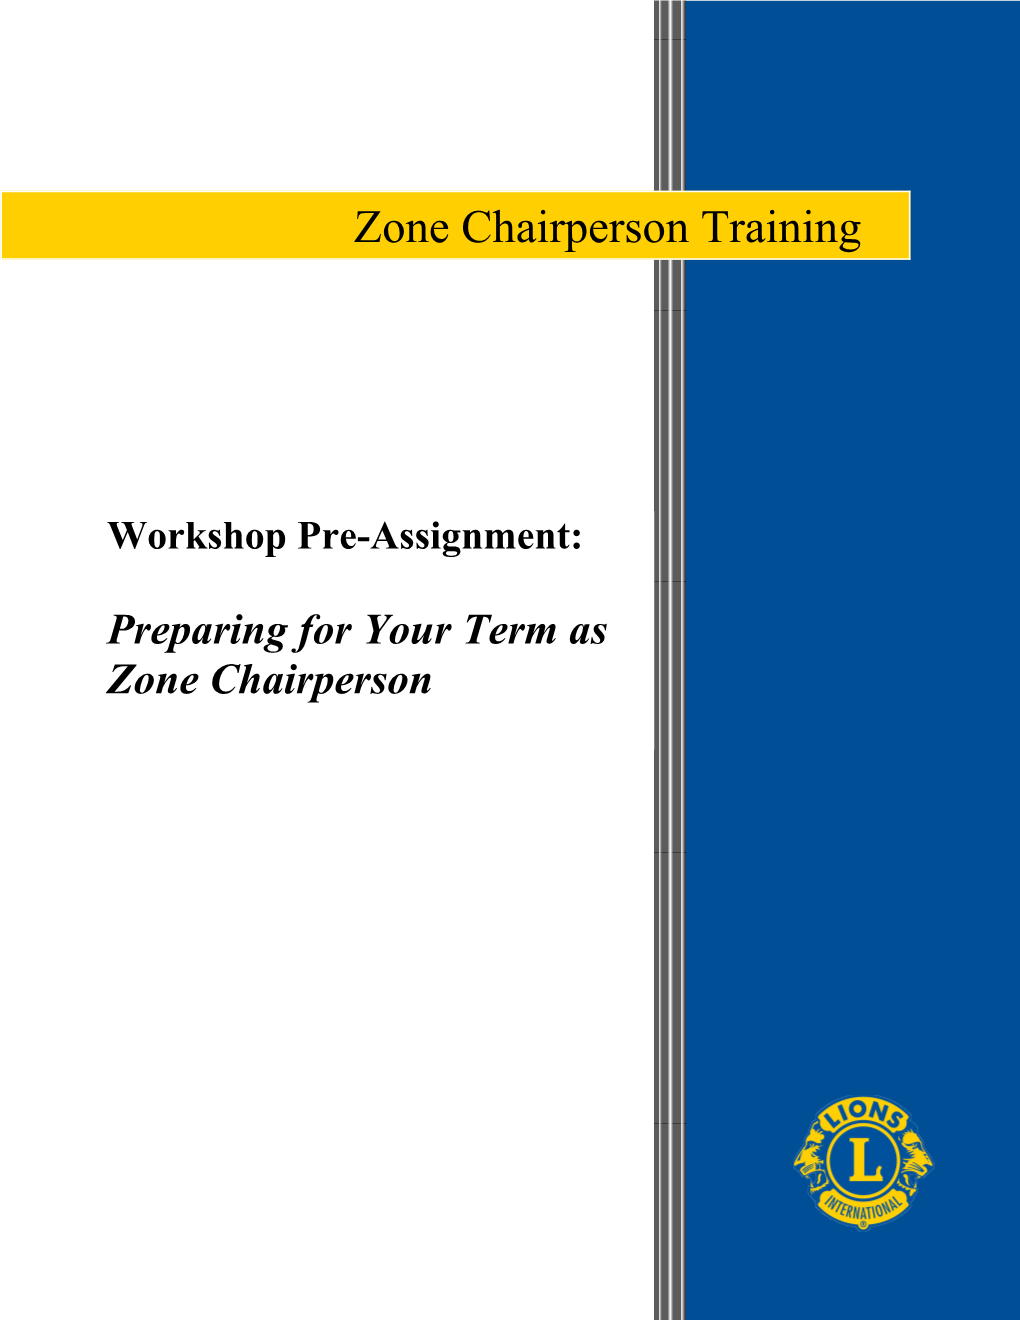 Workshop Pre-Assignment: Preparing for Your Term As Zone Chairperson